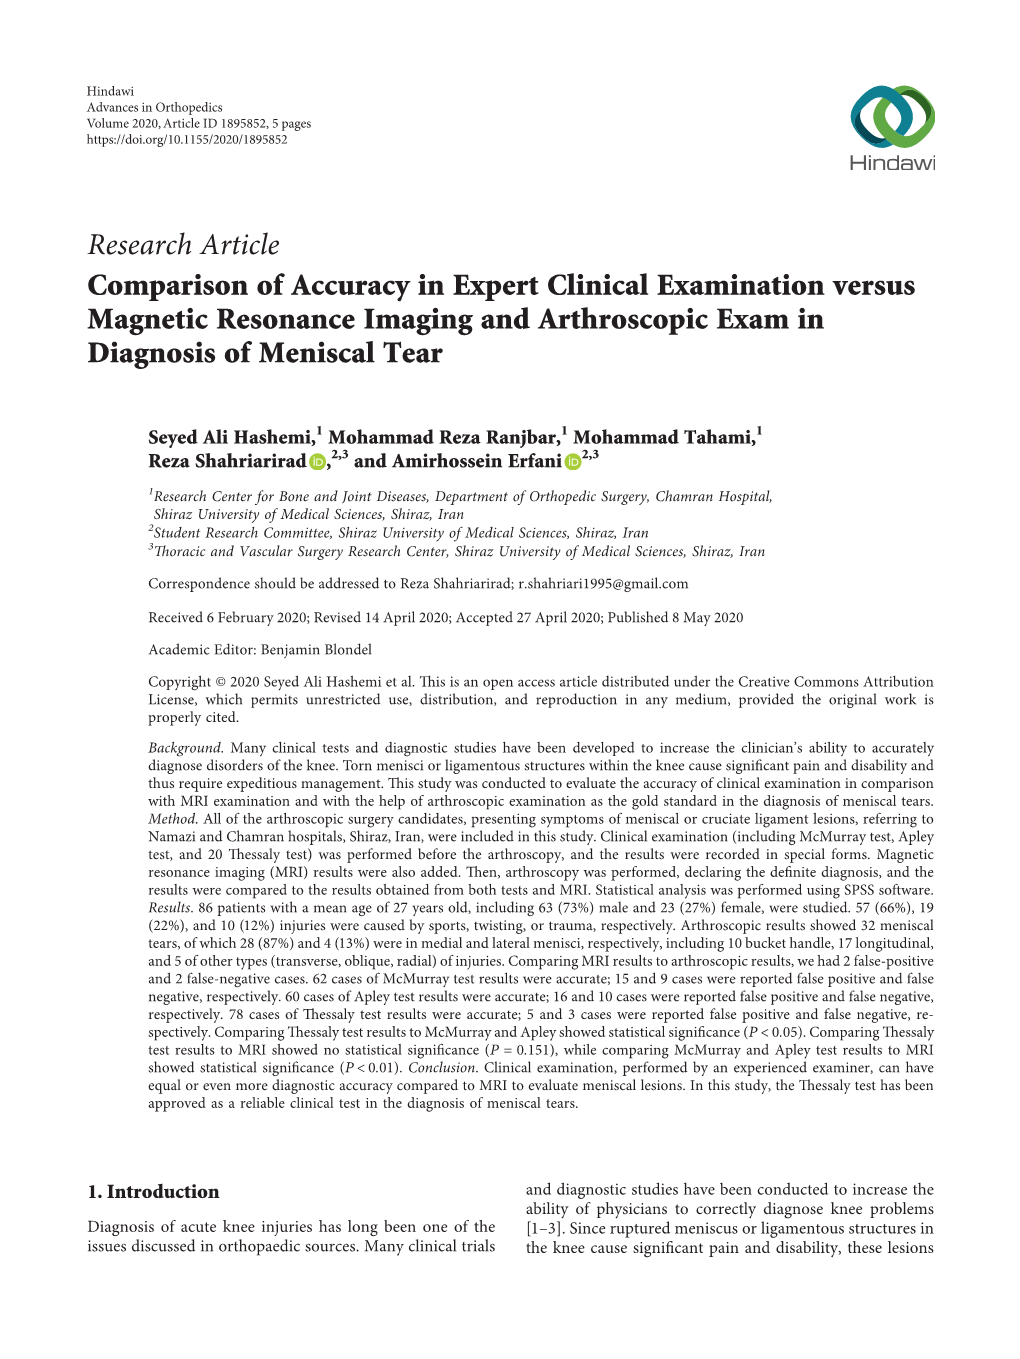 Comparison of Accuracy in Expert Clinical Examination Versus Magnetic Resonance Imaging and Arthroscopic Exam in Diagnosis of Meniscal Tear